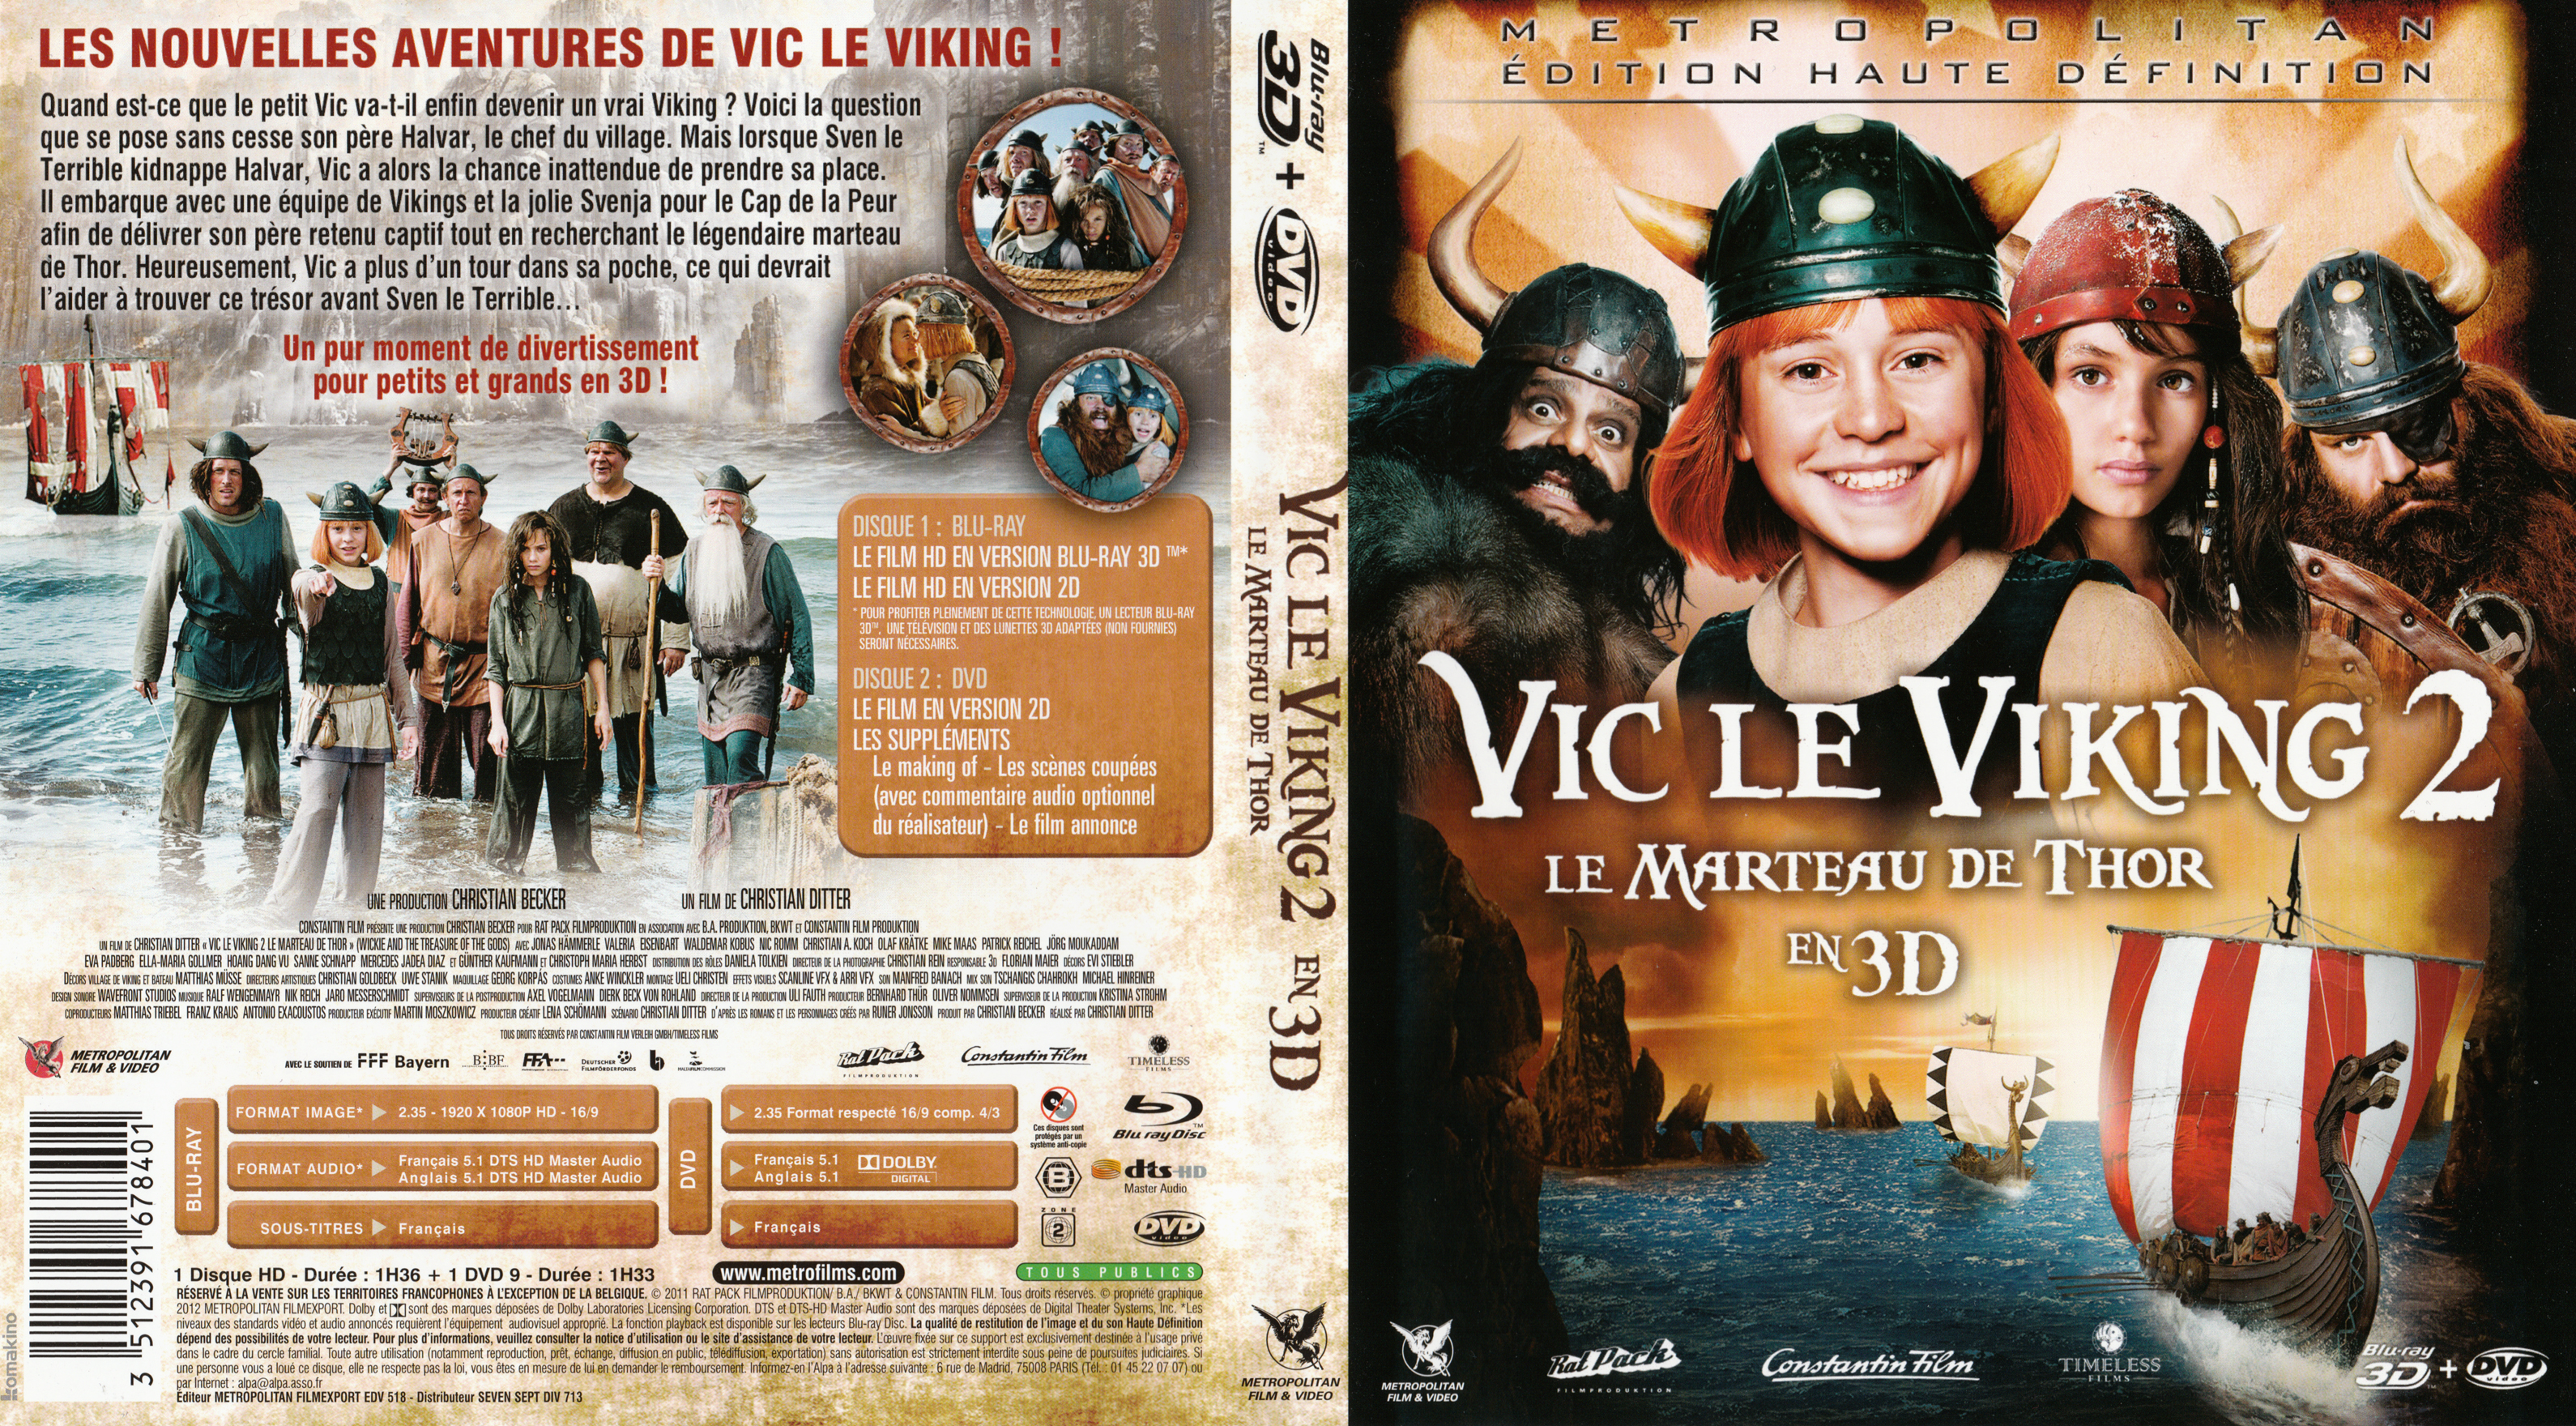 Jaquette DVD Vic le Viking 2 (BLU-RAY)